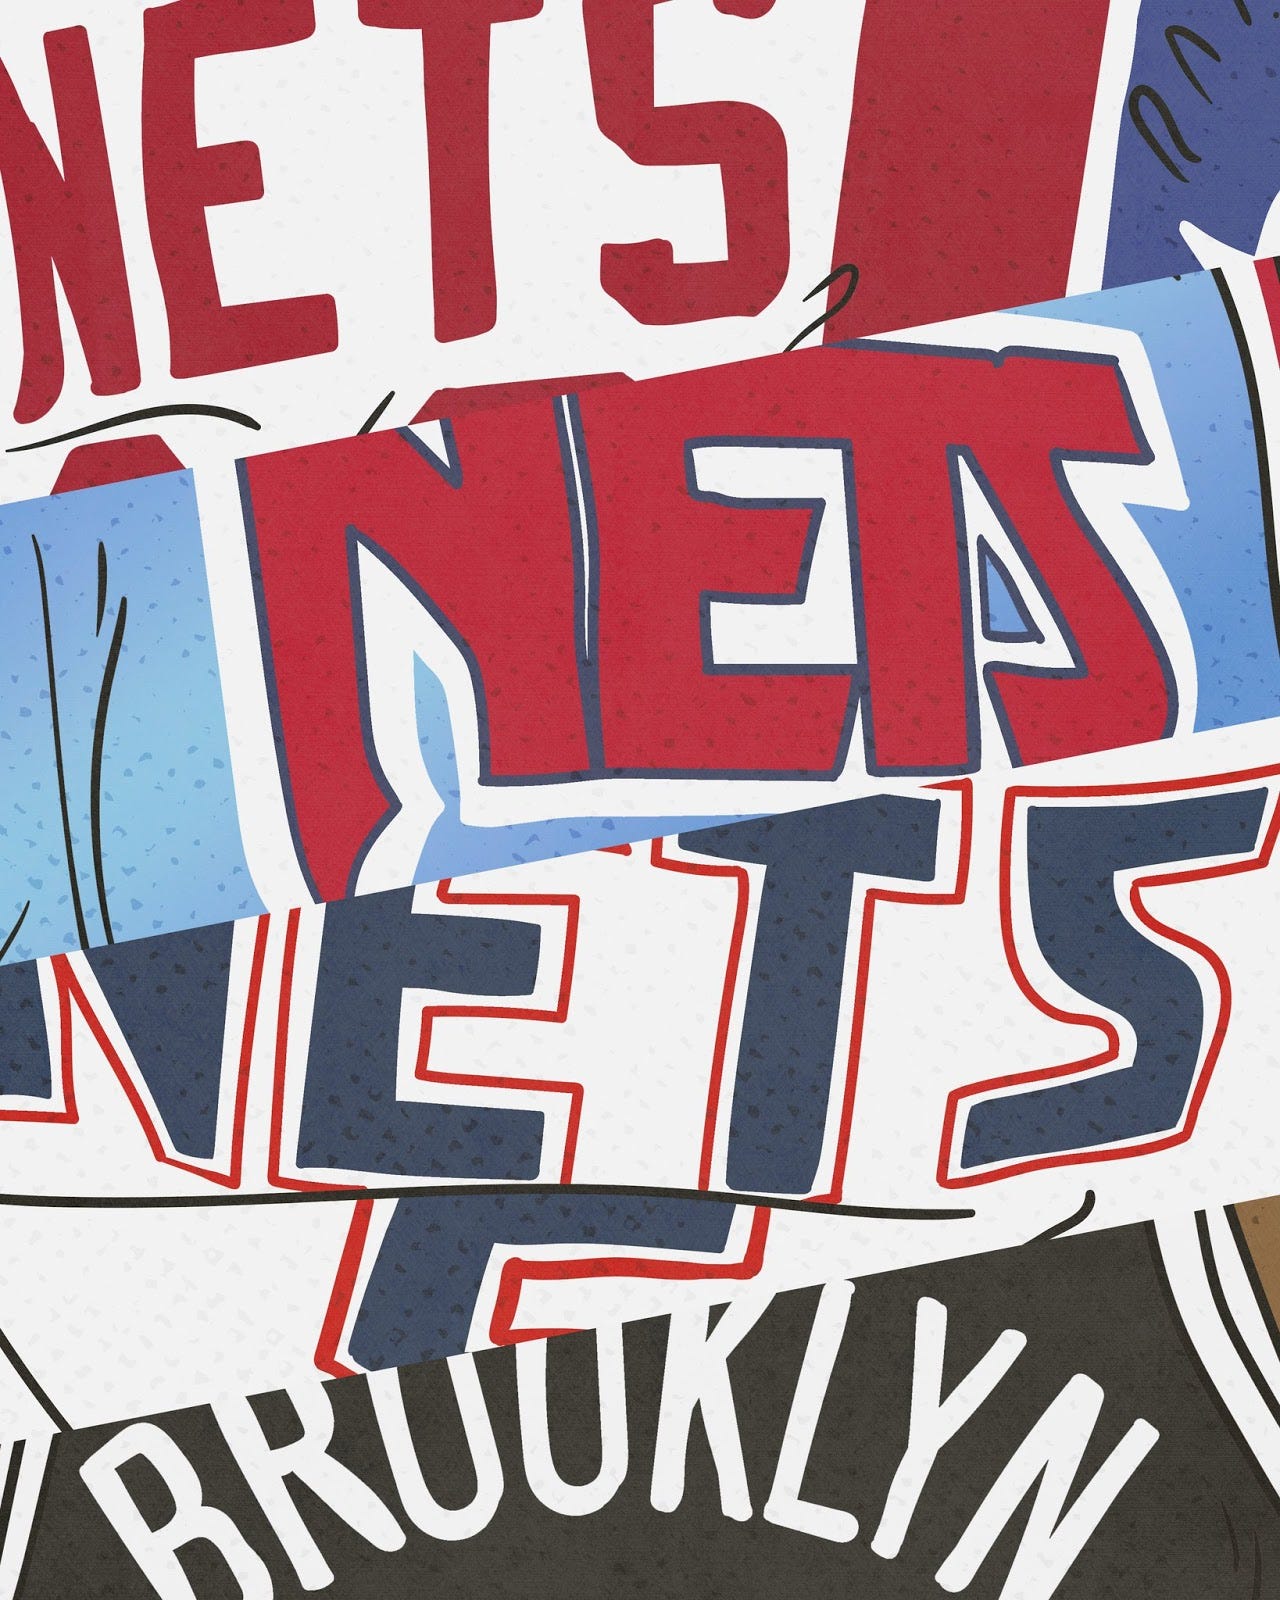 Which New Jersey Nets Uniform is better. Red or Navy Blue uniform